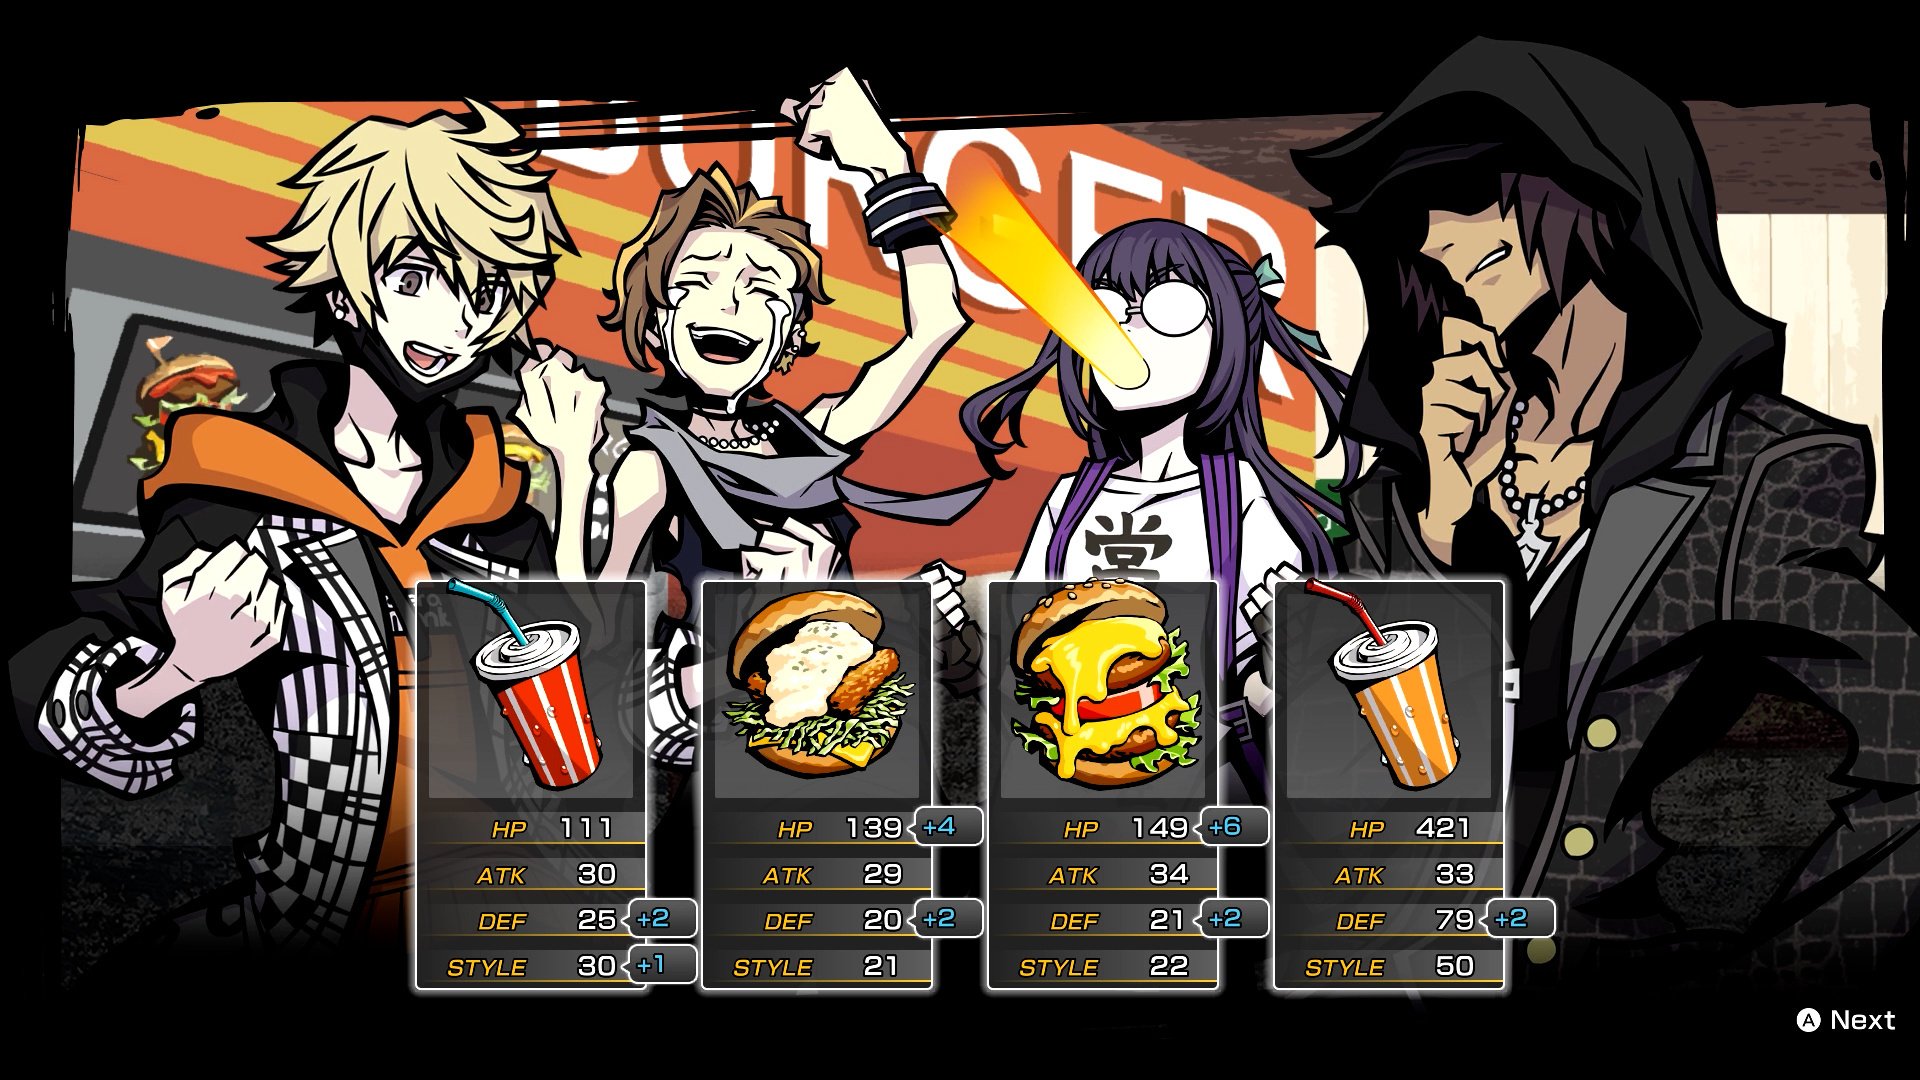 Square Enix says Neo: The World Ends with You 'underperformed' its  expectations